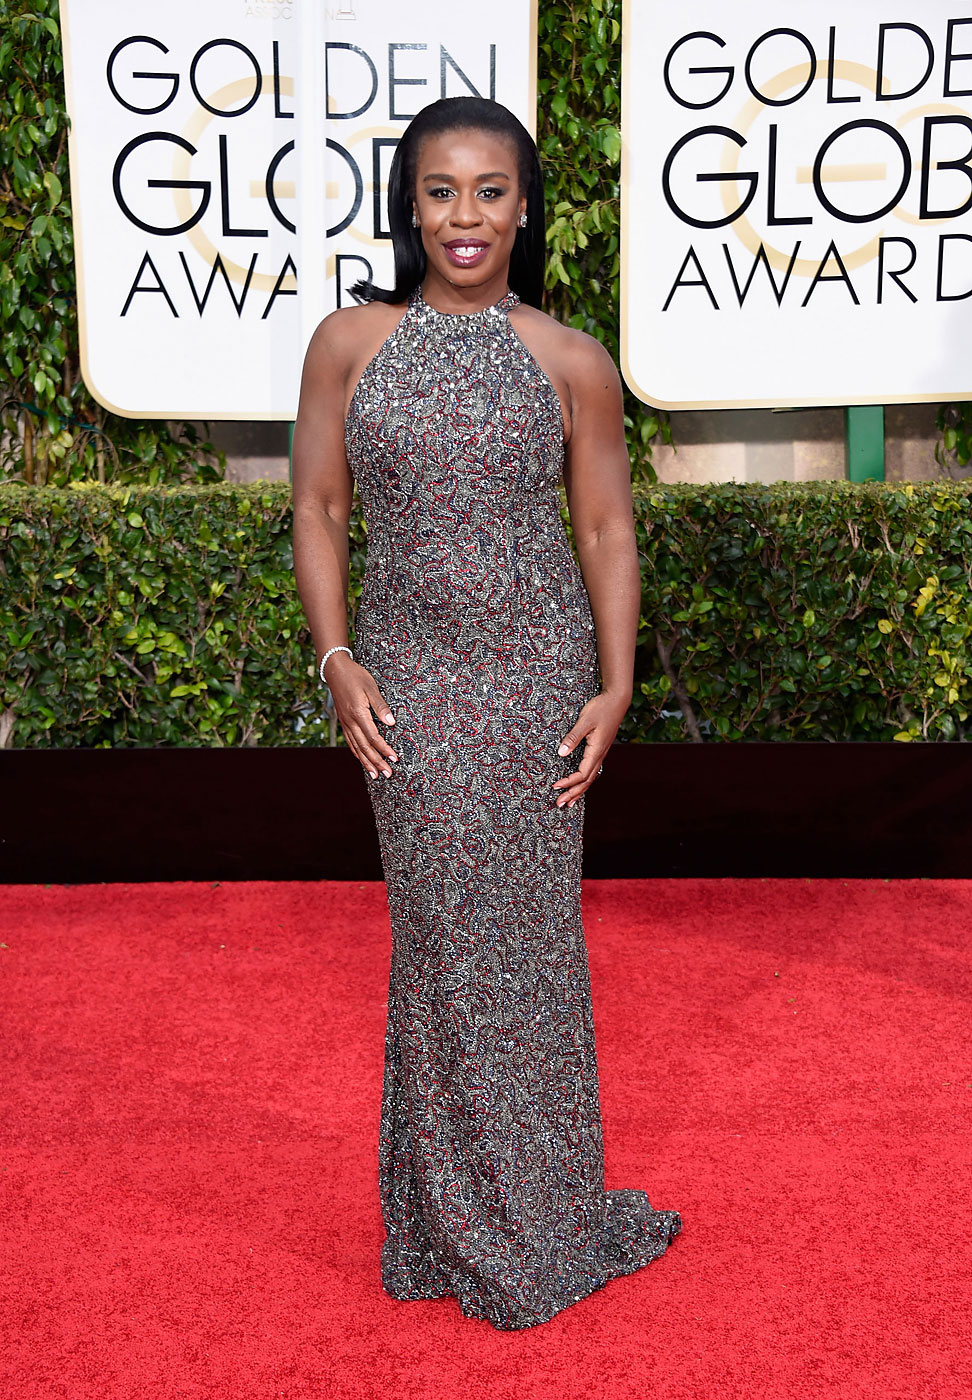 Uzo Aduba attends the 72nd Annual Golden Globe Awards at The Beverly Hilton Hotel on Jan. 11, 2015 in Beverly Hills, Calif.